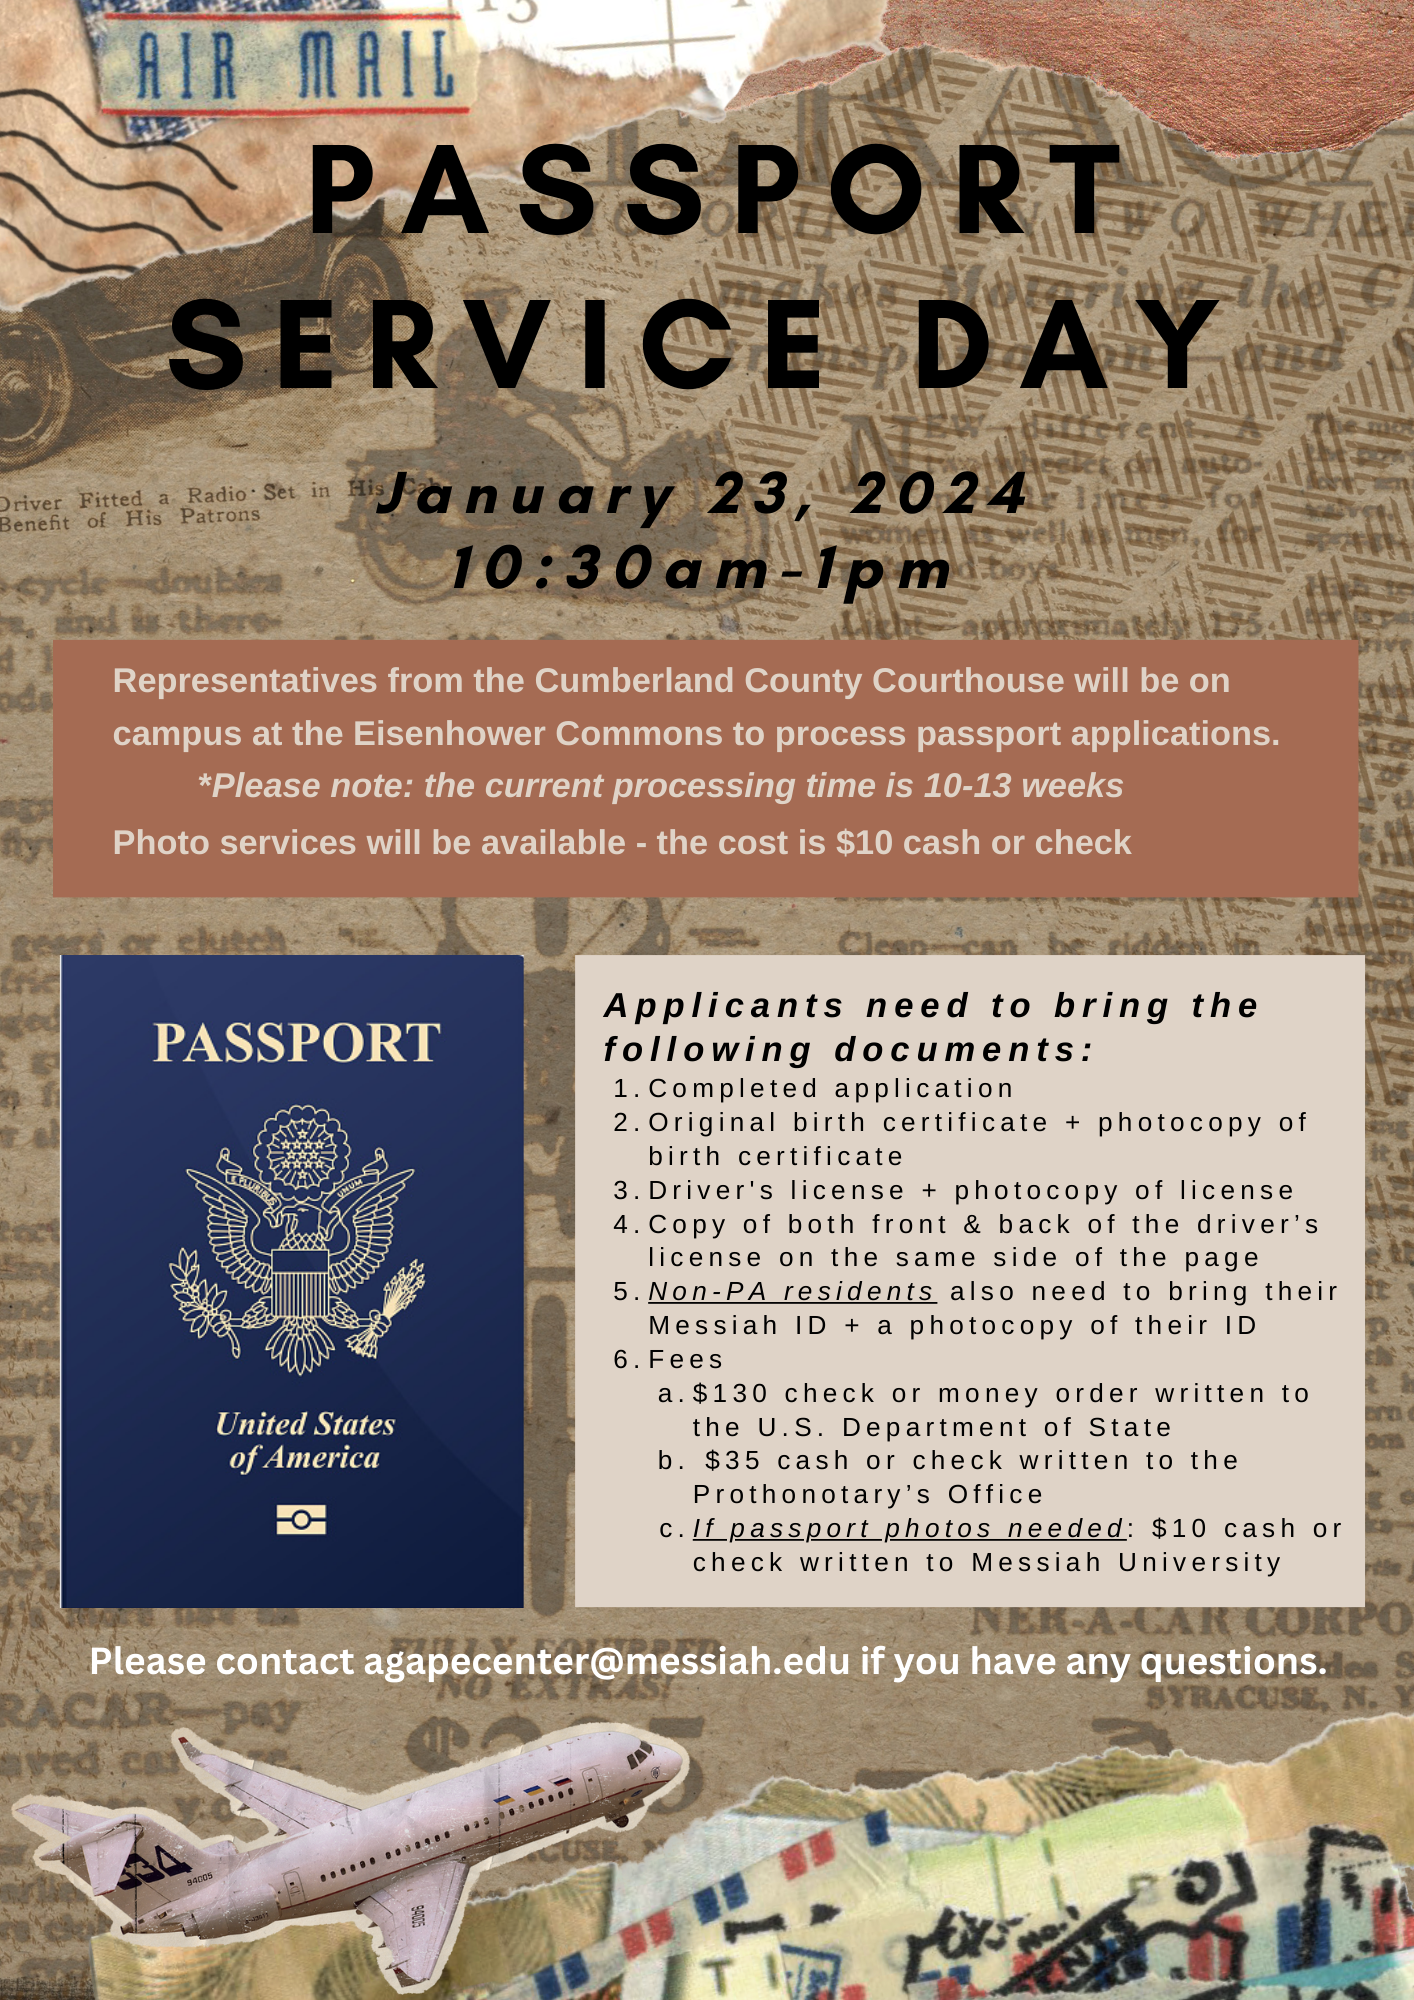 Flyer with information about passport services day